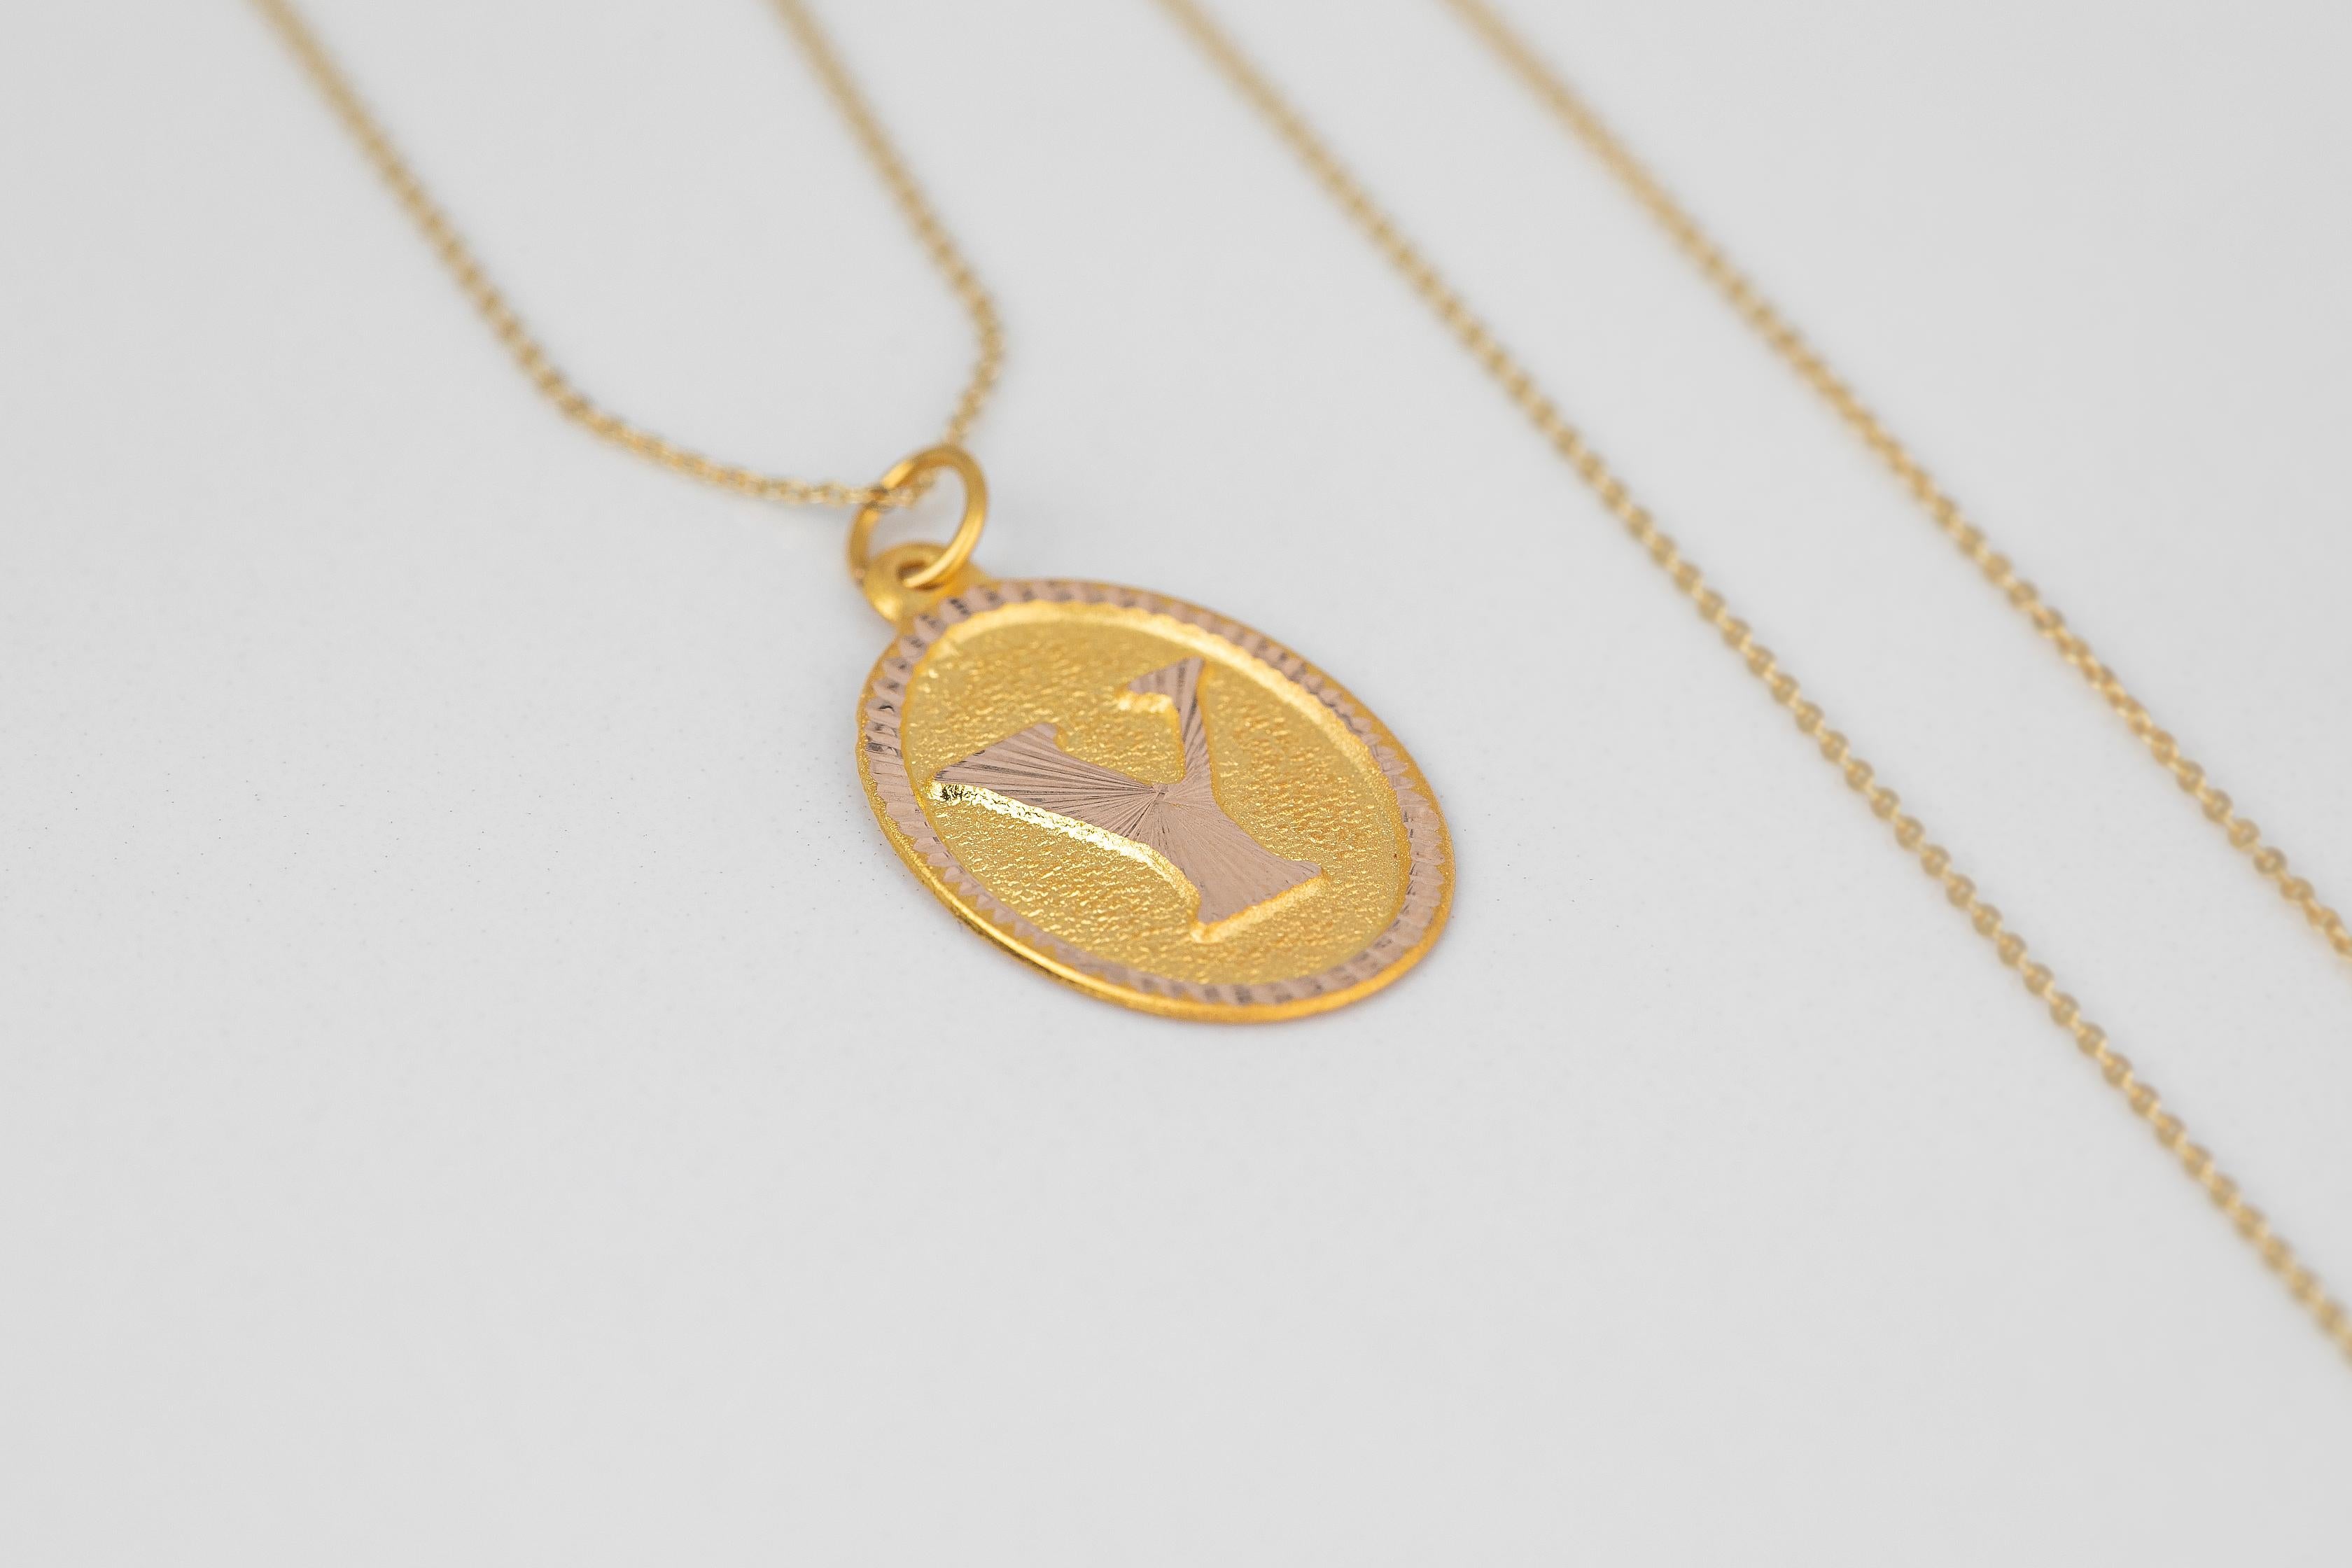 14K Gold Necklaces, Letter Necklace Models, Letter Y Gold Necklace-Gift Necklace Models, Daily Necklaces, Letter Jewelry

It's a manual labor product. 'Handmade'. Fashionable product.

This necklace was made with quality materials and excellent